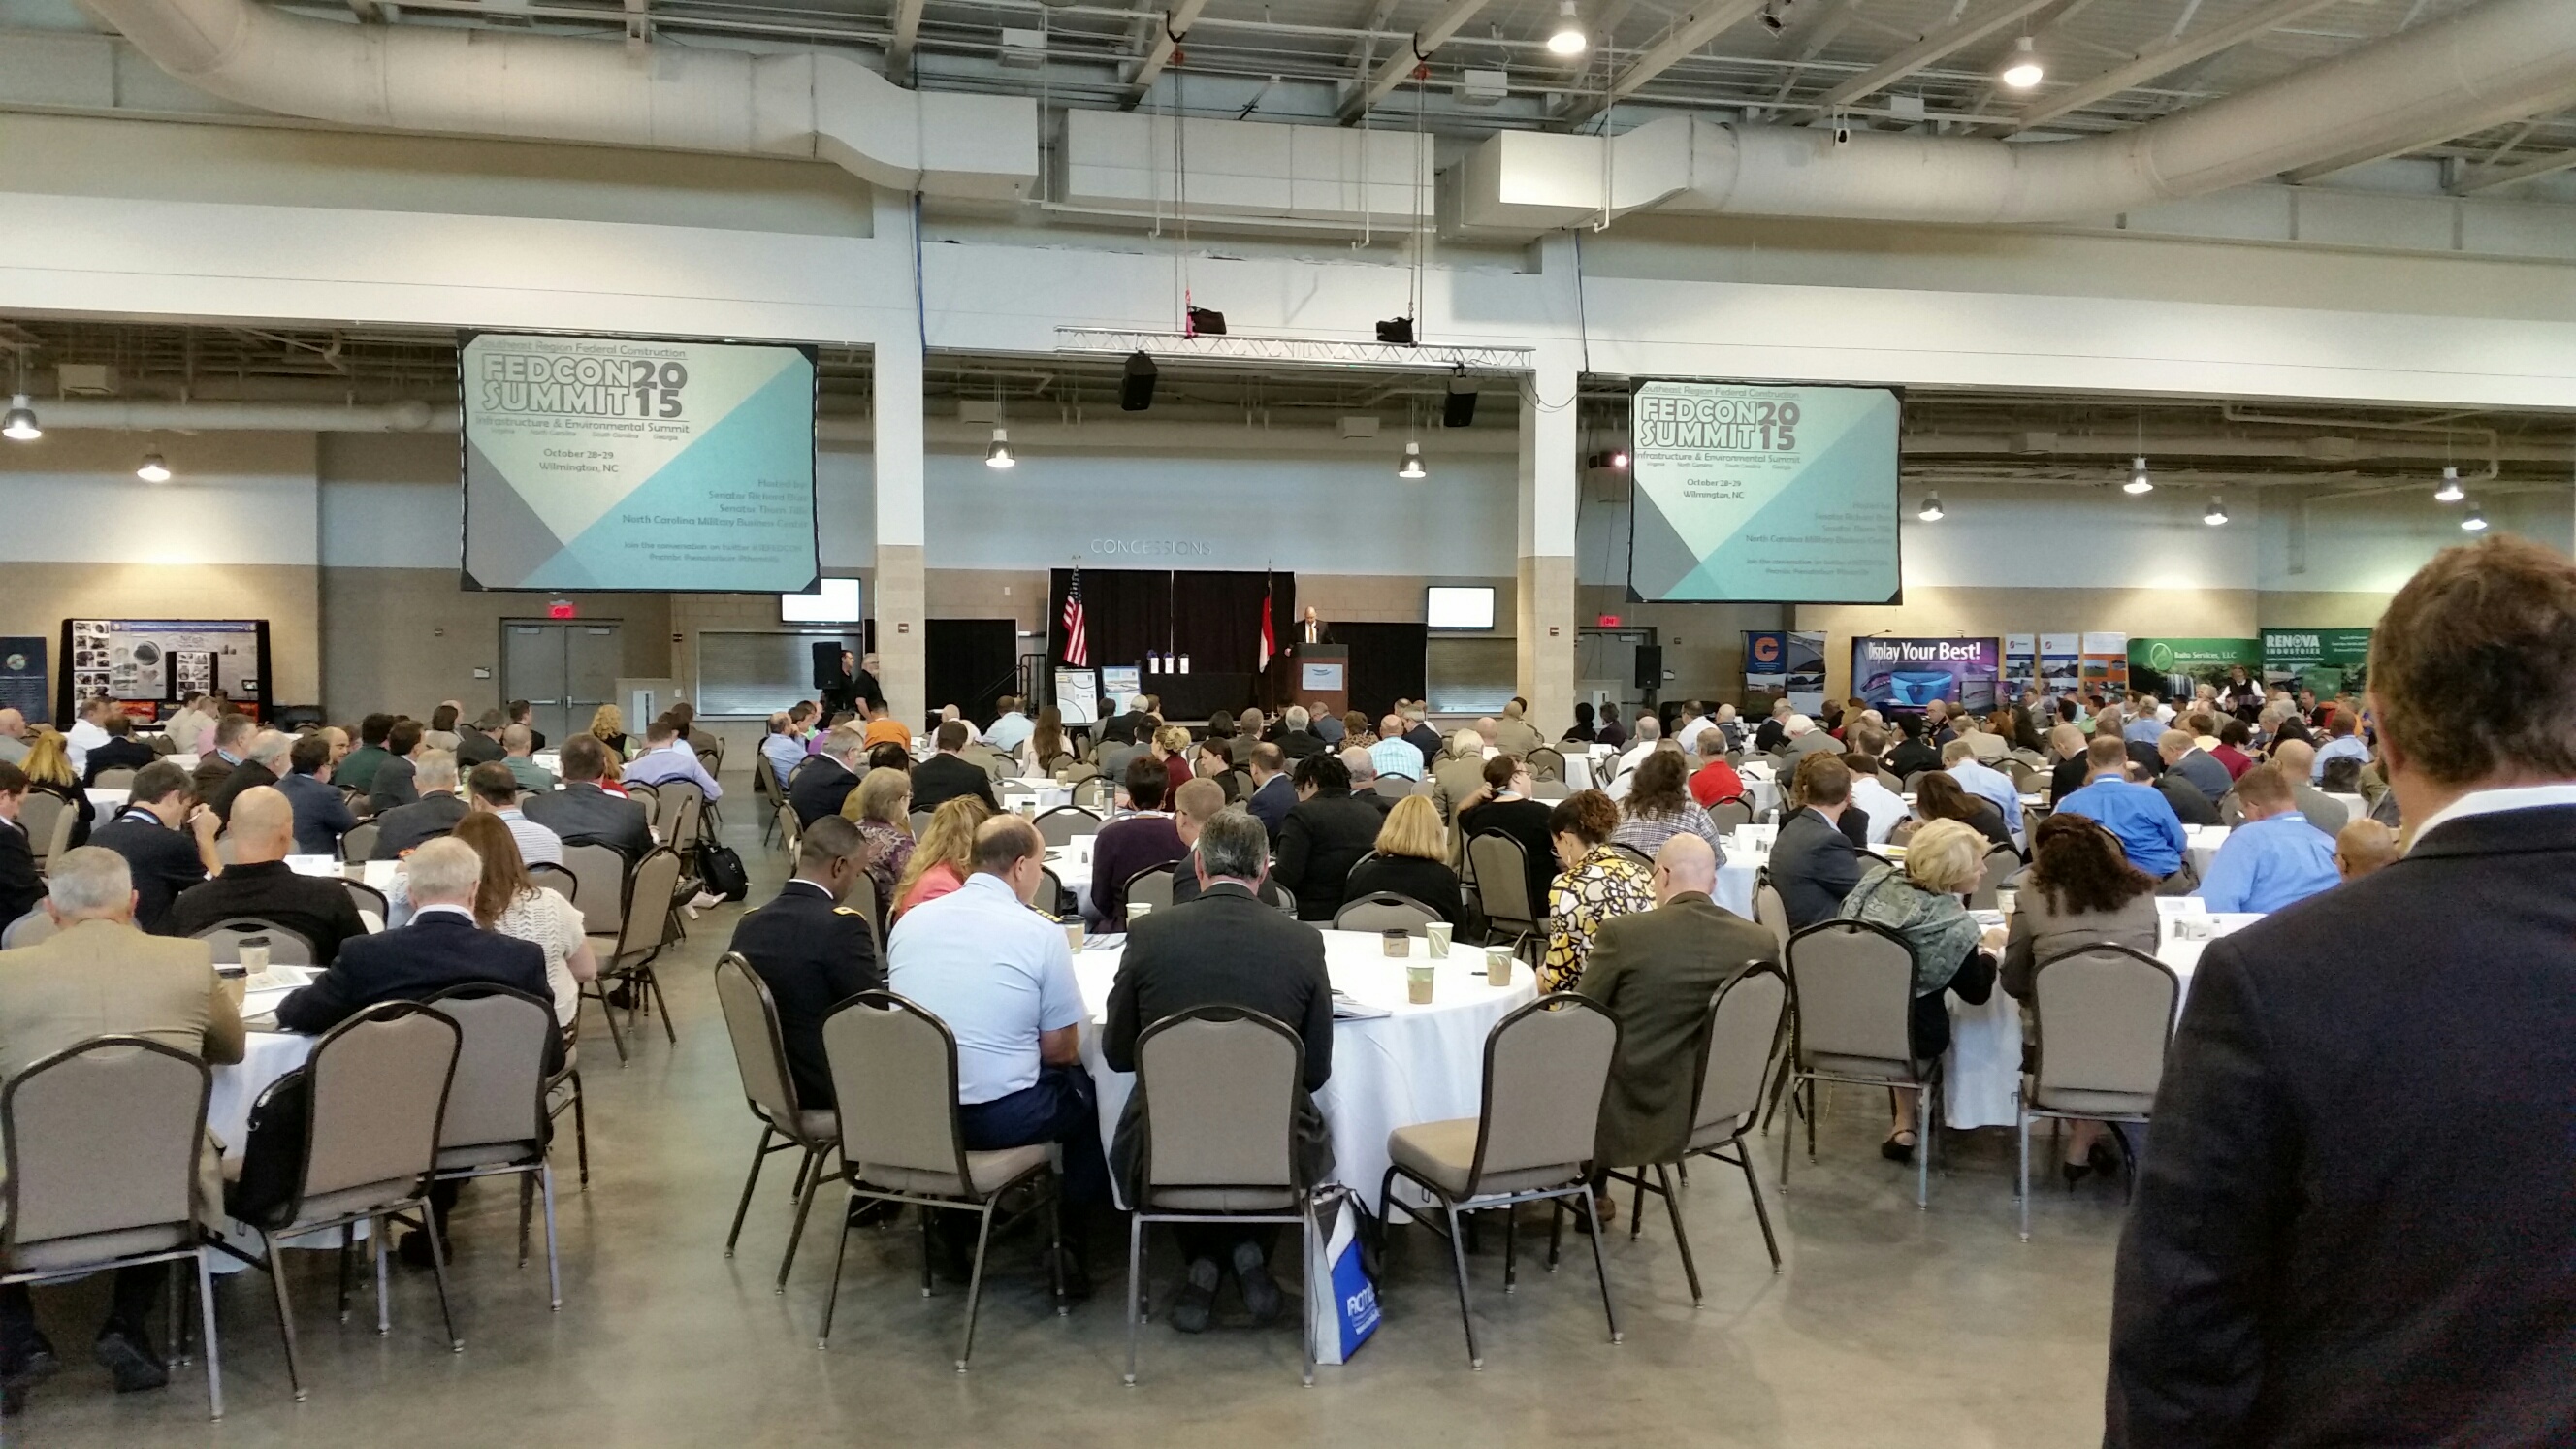 CLH Attendance at Southeast FEDCON Summit